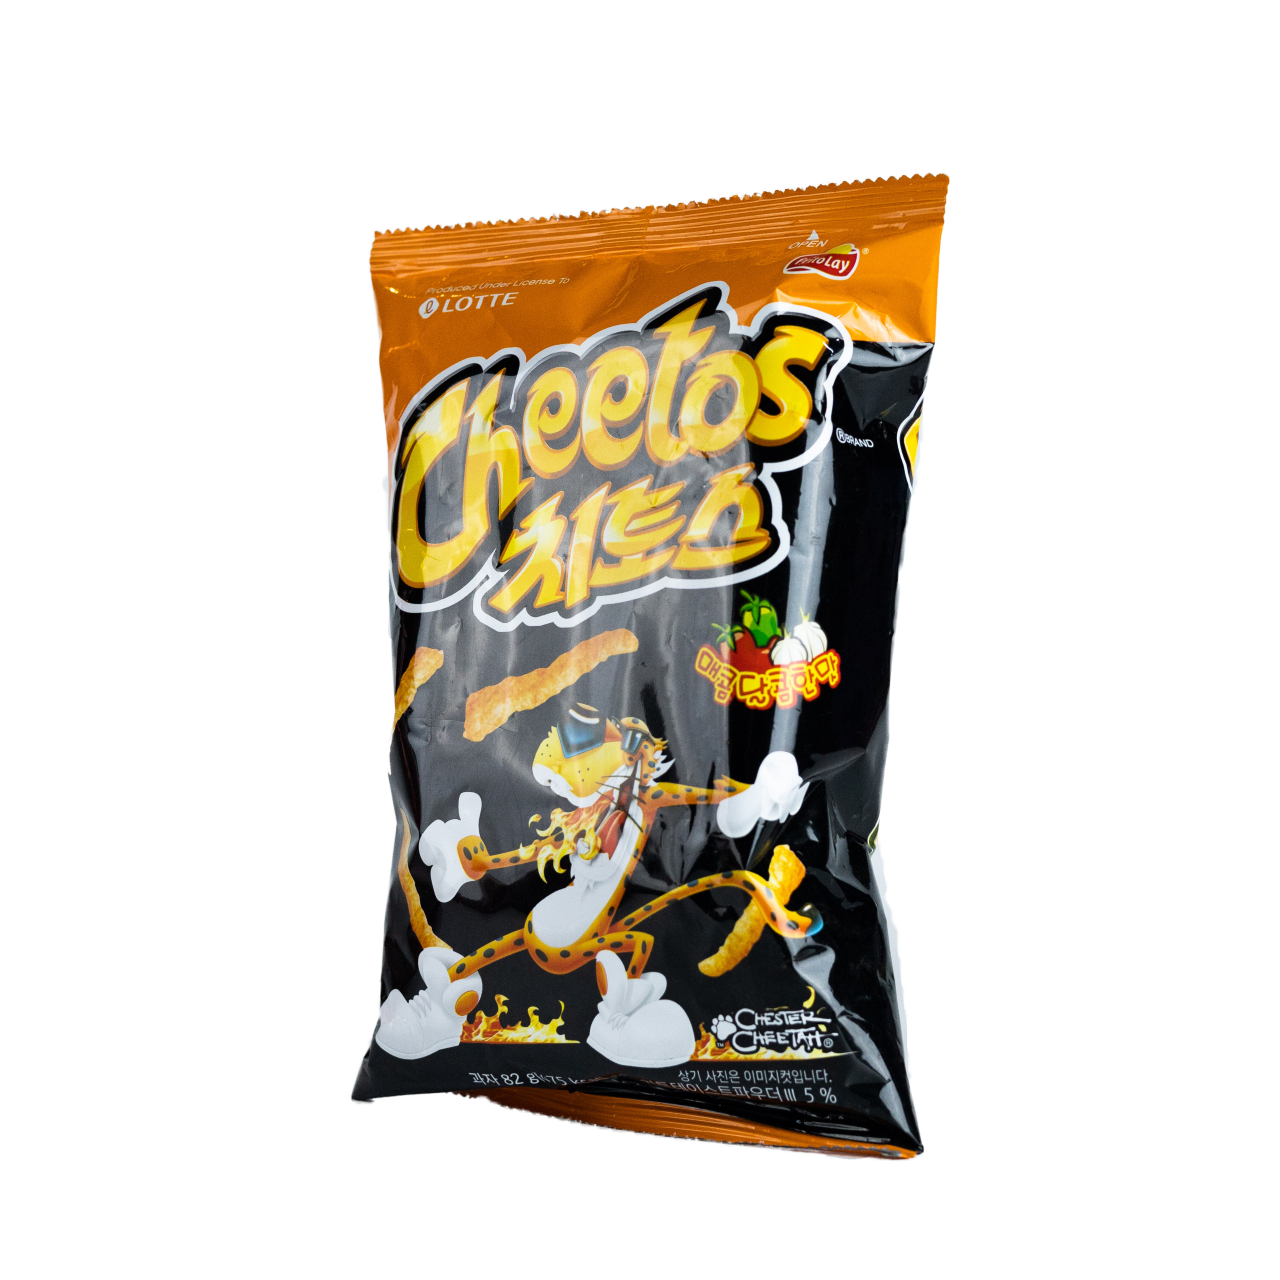 Cheetos Sweet and Spicy